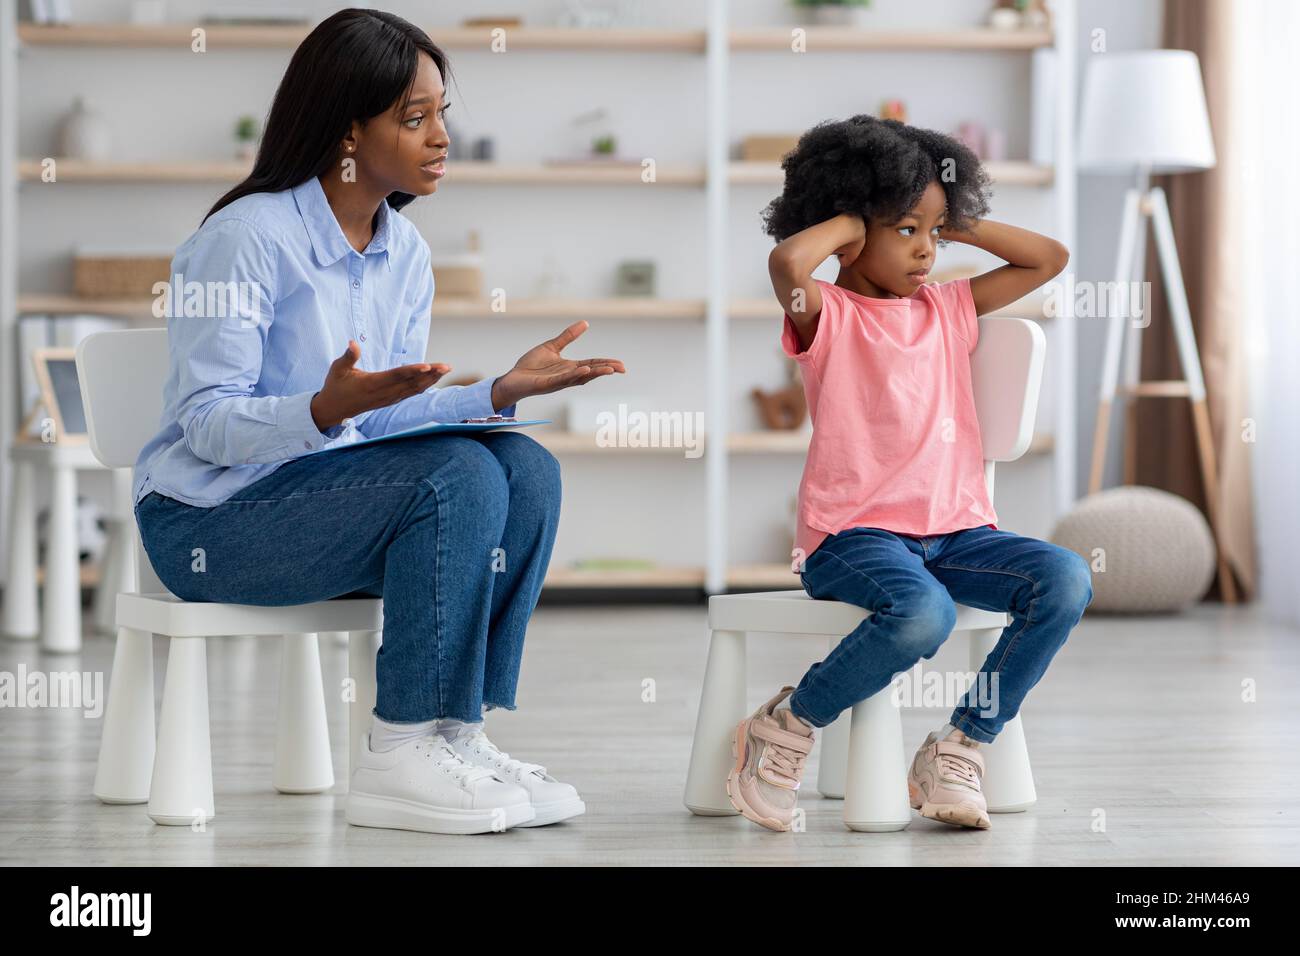 African american woman psychotherapist talking to unruly little girl Stock Photo